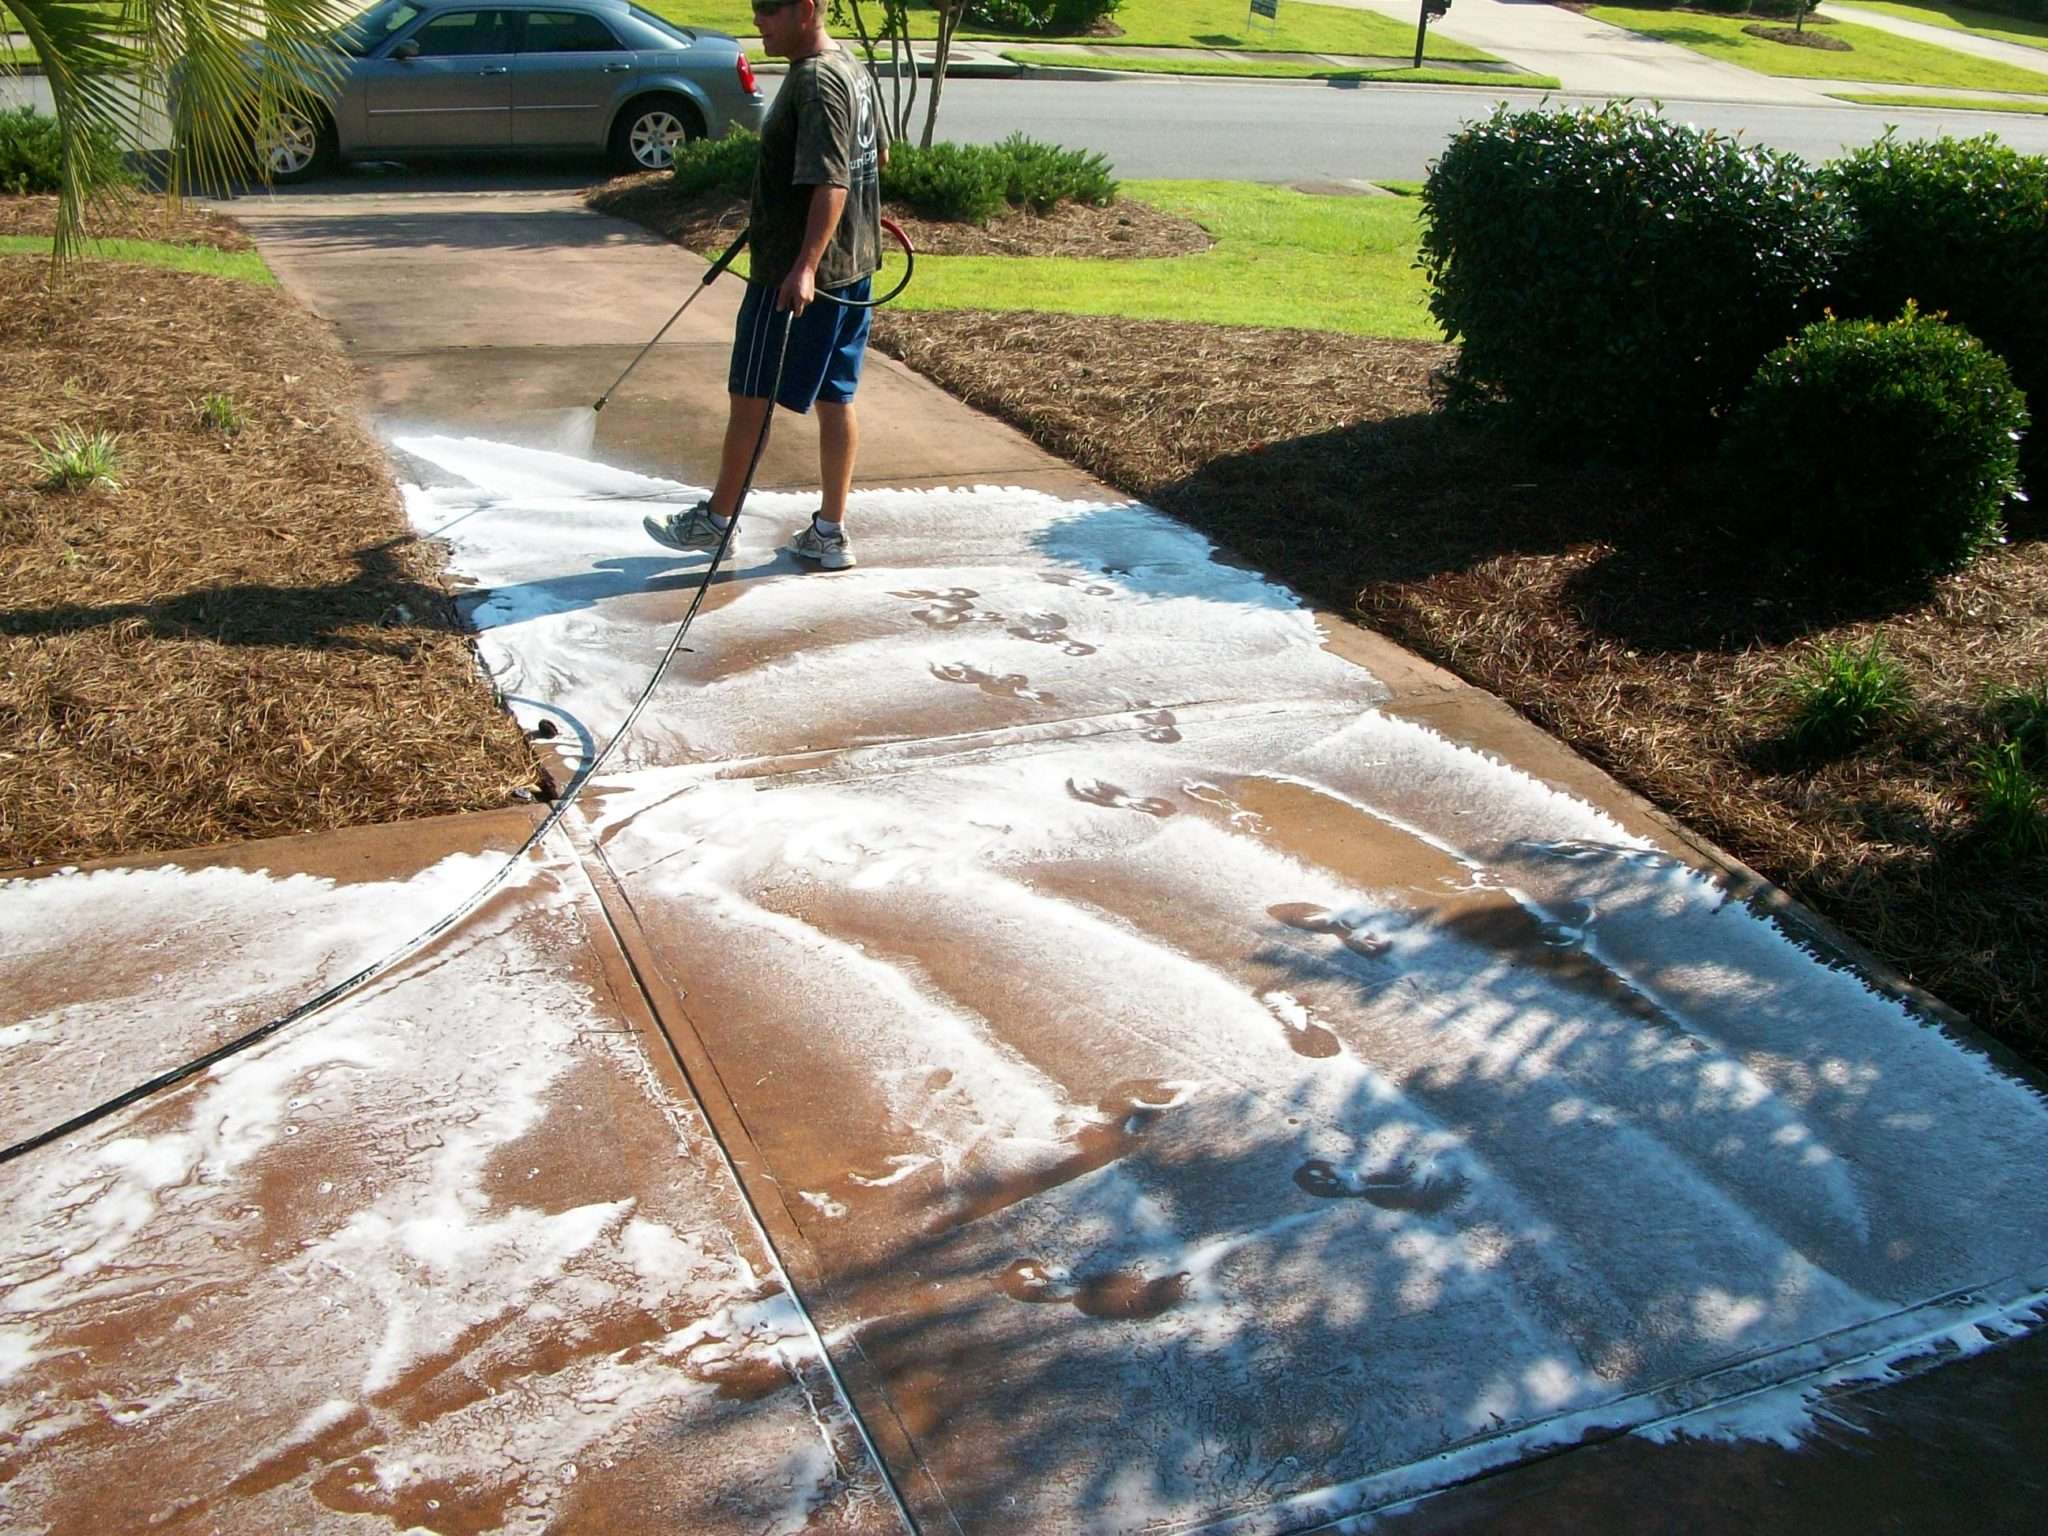 How much does it cost to pressure wash a pool deck?